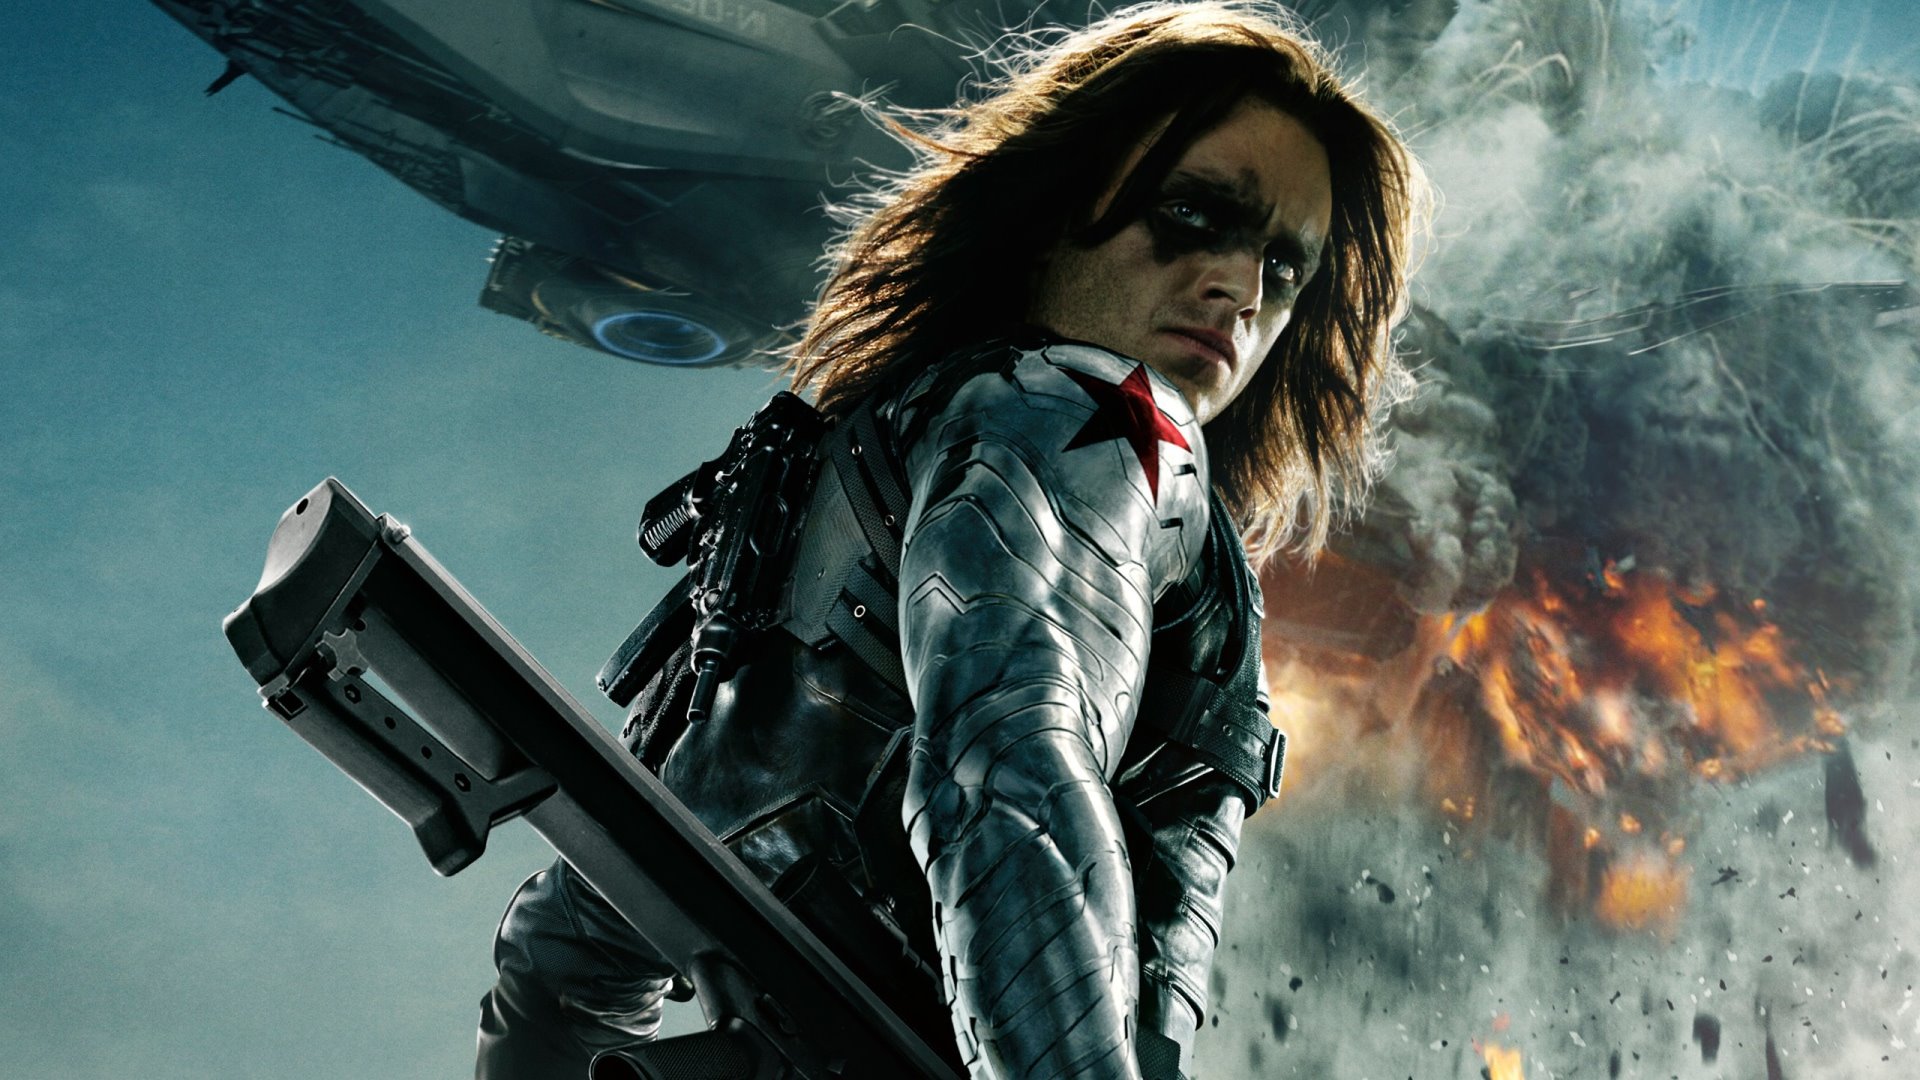 The Winter Soldier Movie Photos HD Wallpaper Image Pictures